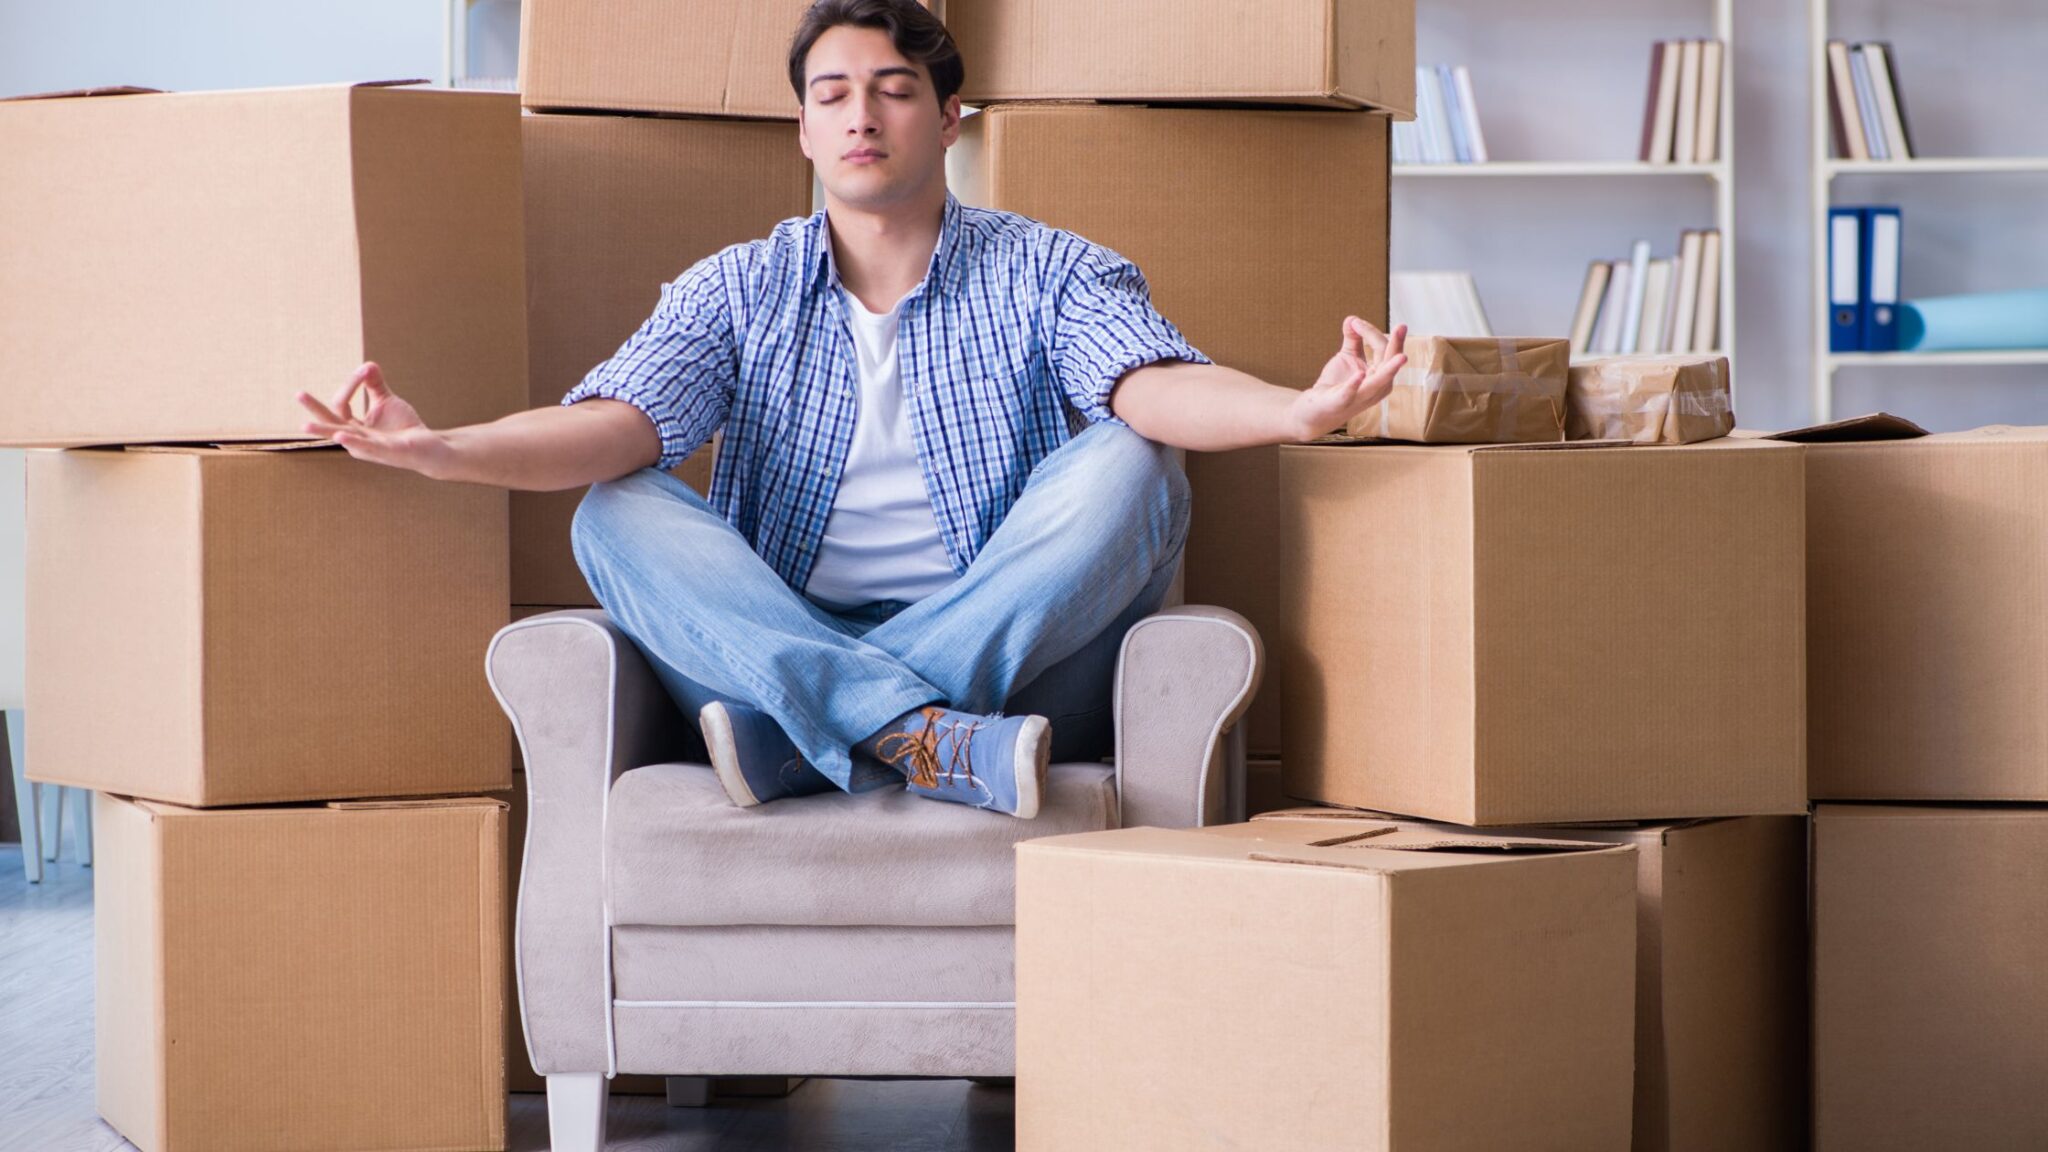 hire professional packers from Careful Movers